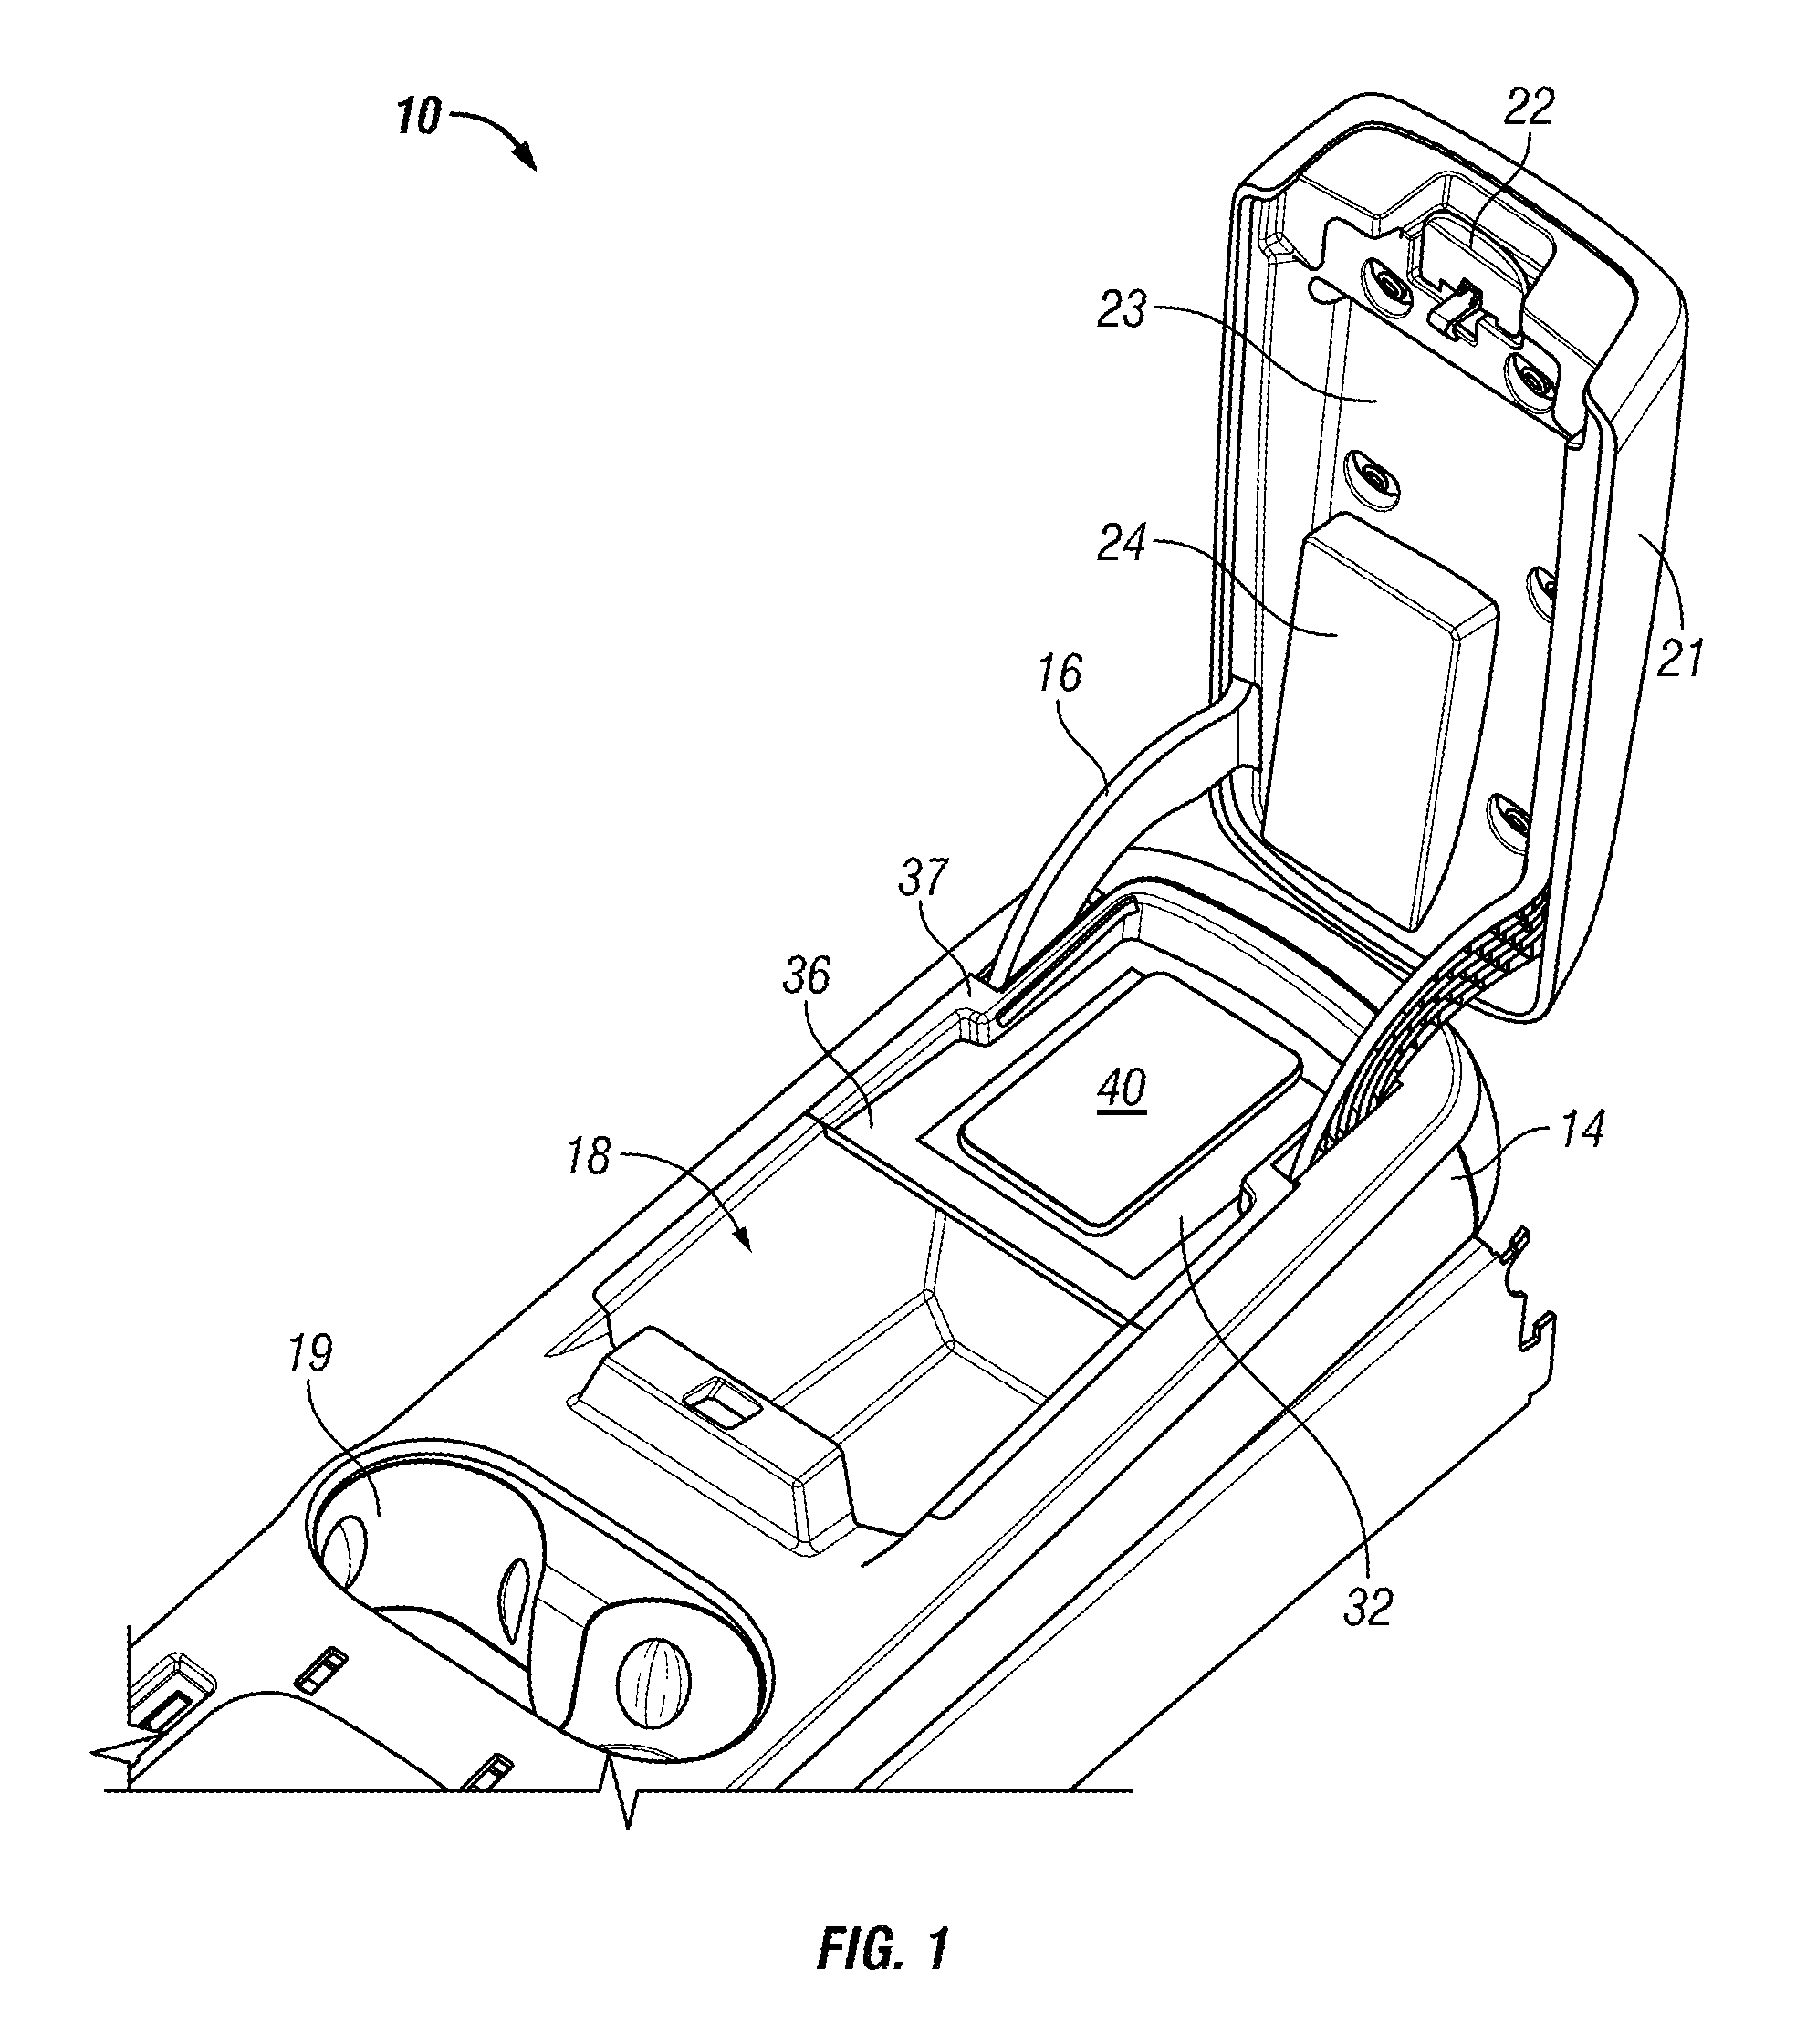 Wireless battery charging apparatus mounted in a vehicle designed to reduce electromagnetic interference